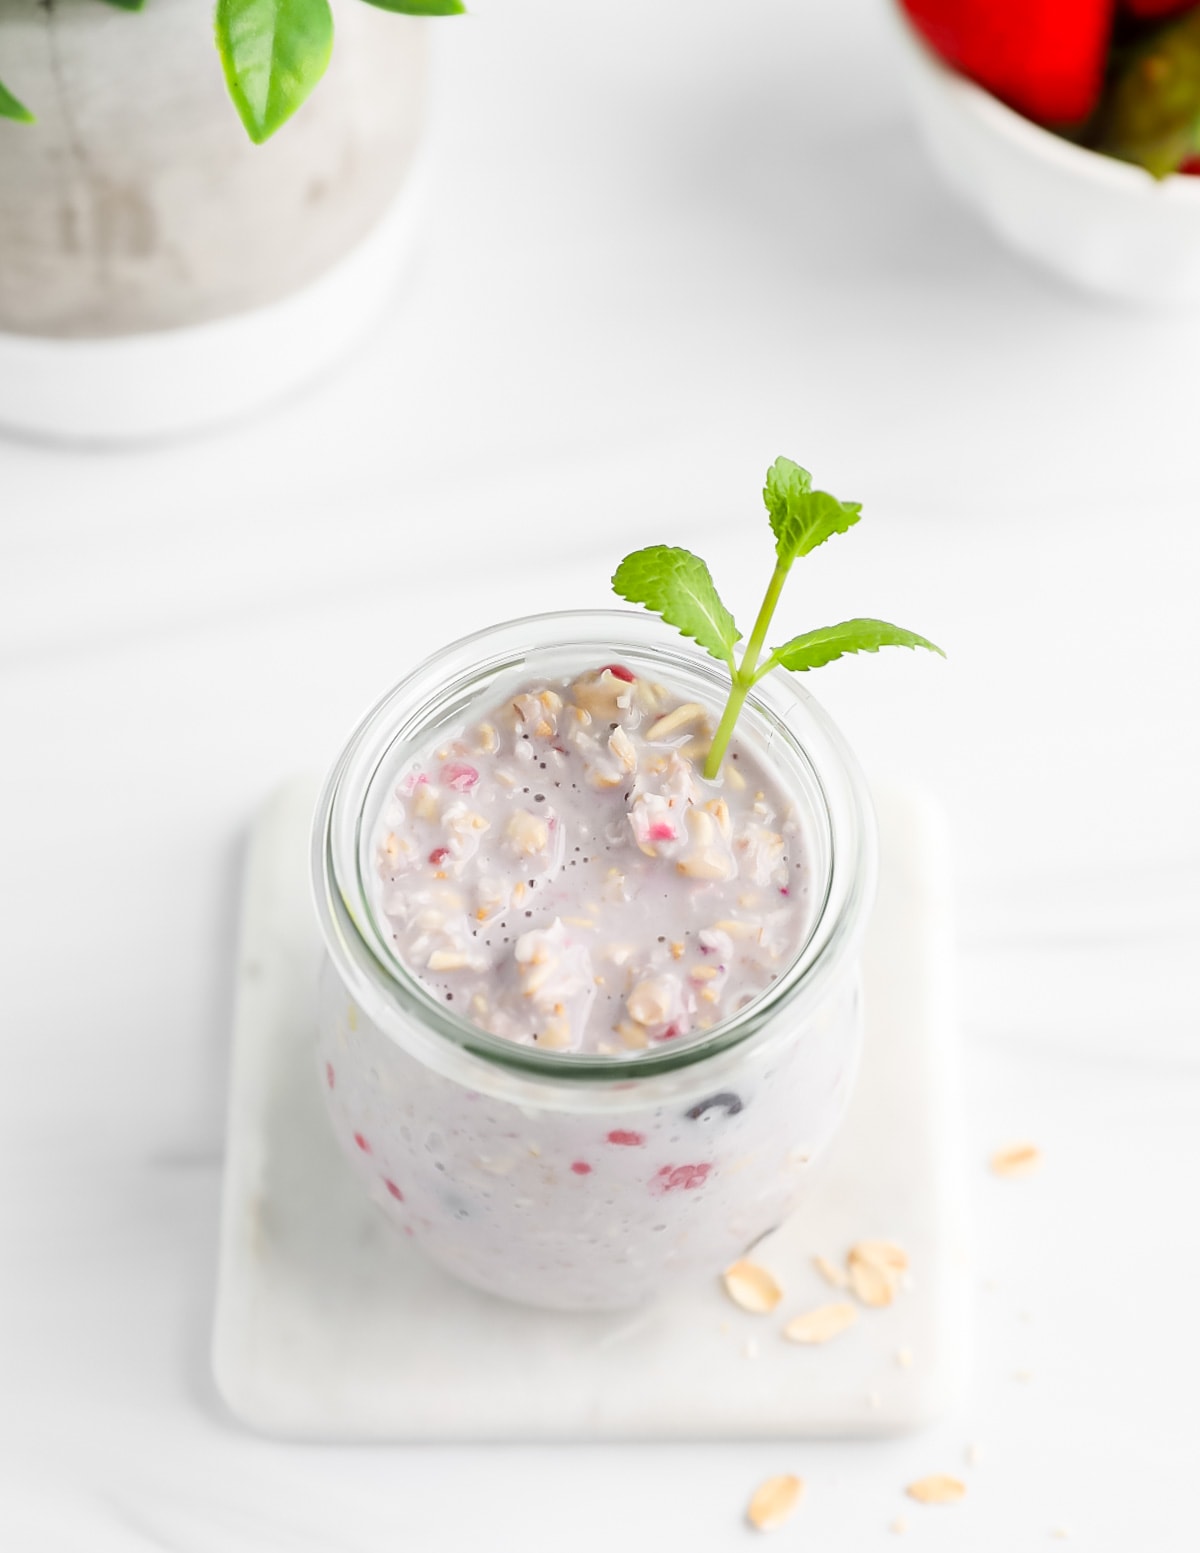 An overhead image of a jar filled with overnight oats and a sprig of fresh mint.